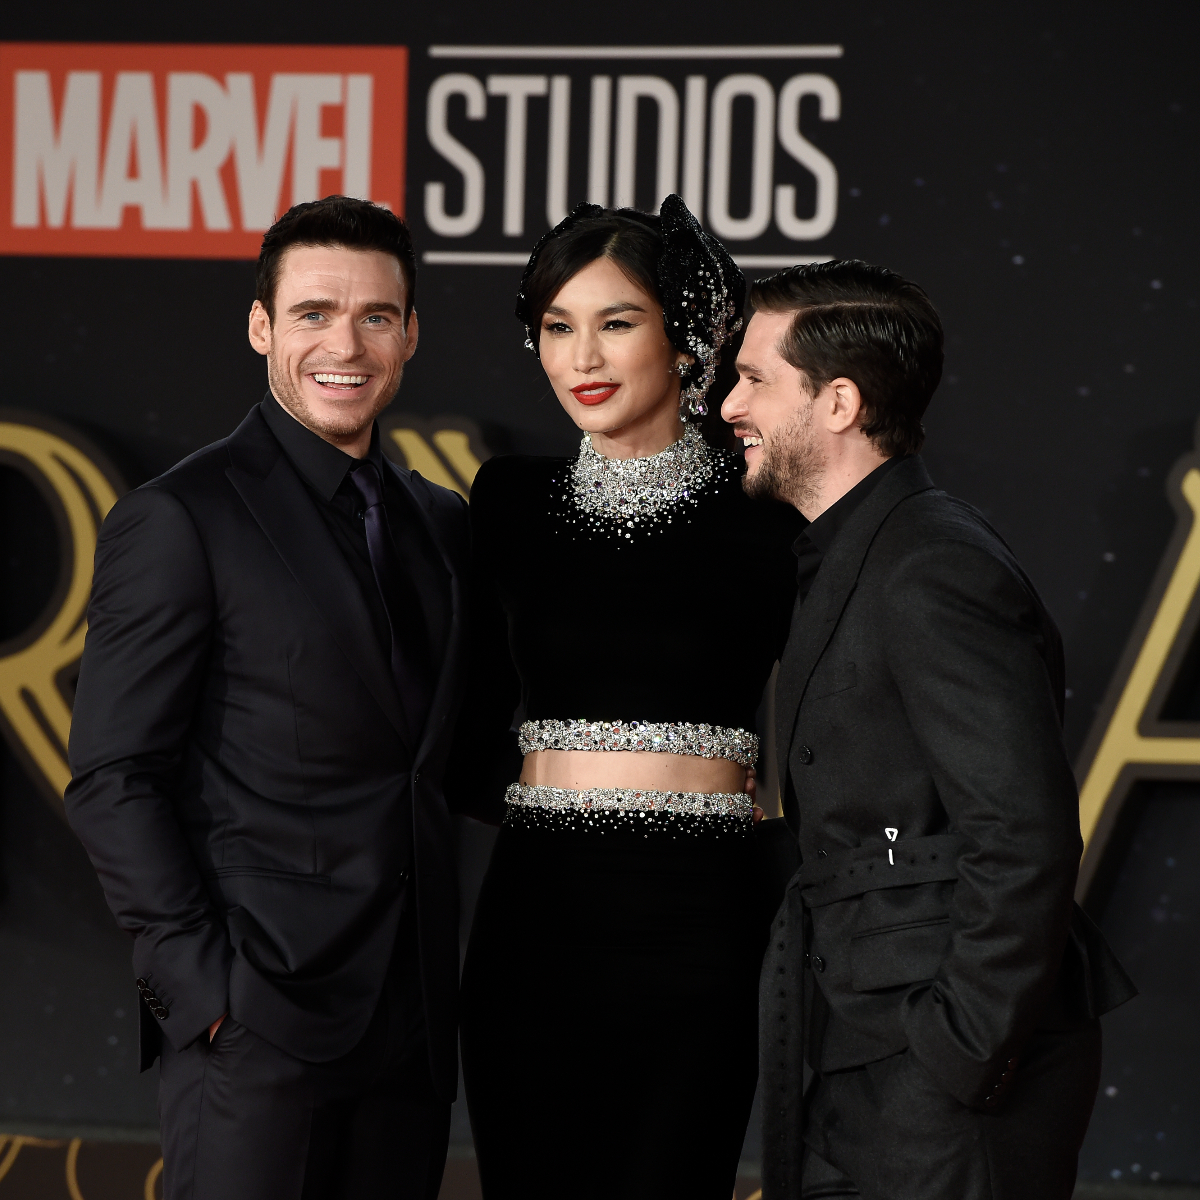 EXCLUSIVE VIDEO: Richard Madden REVEALS filming Eternals with Kit Harington & Gemma Chan didn't feel like work